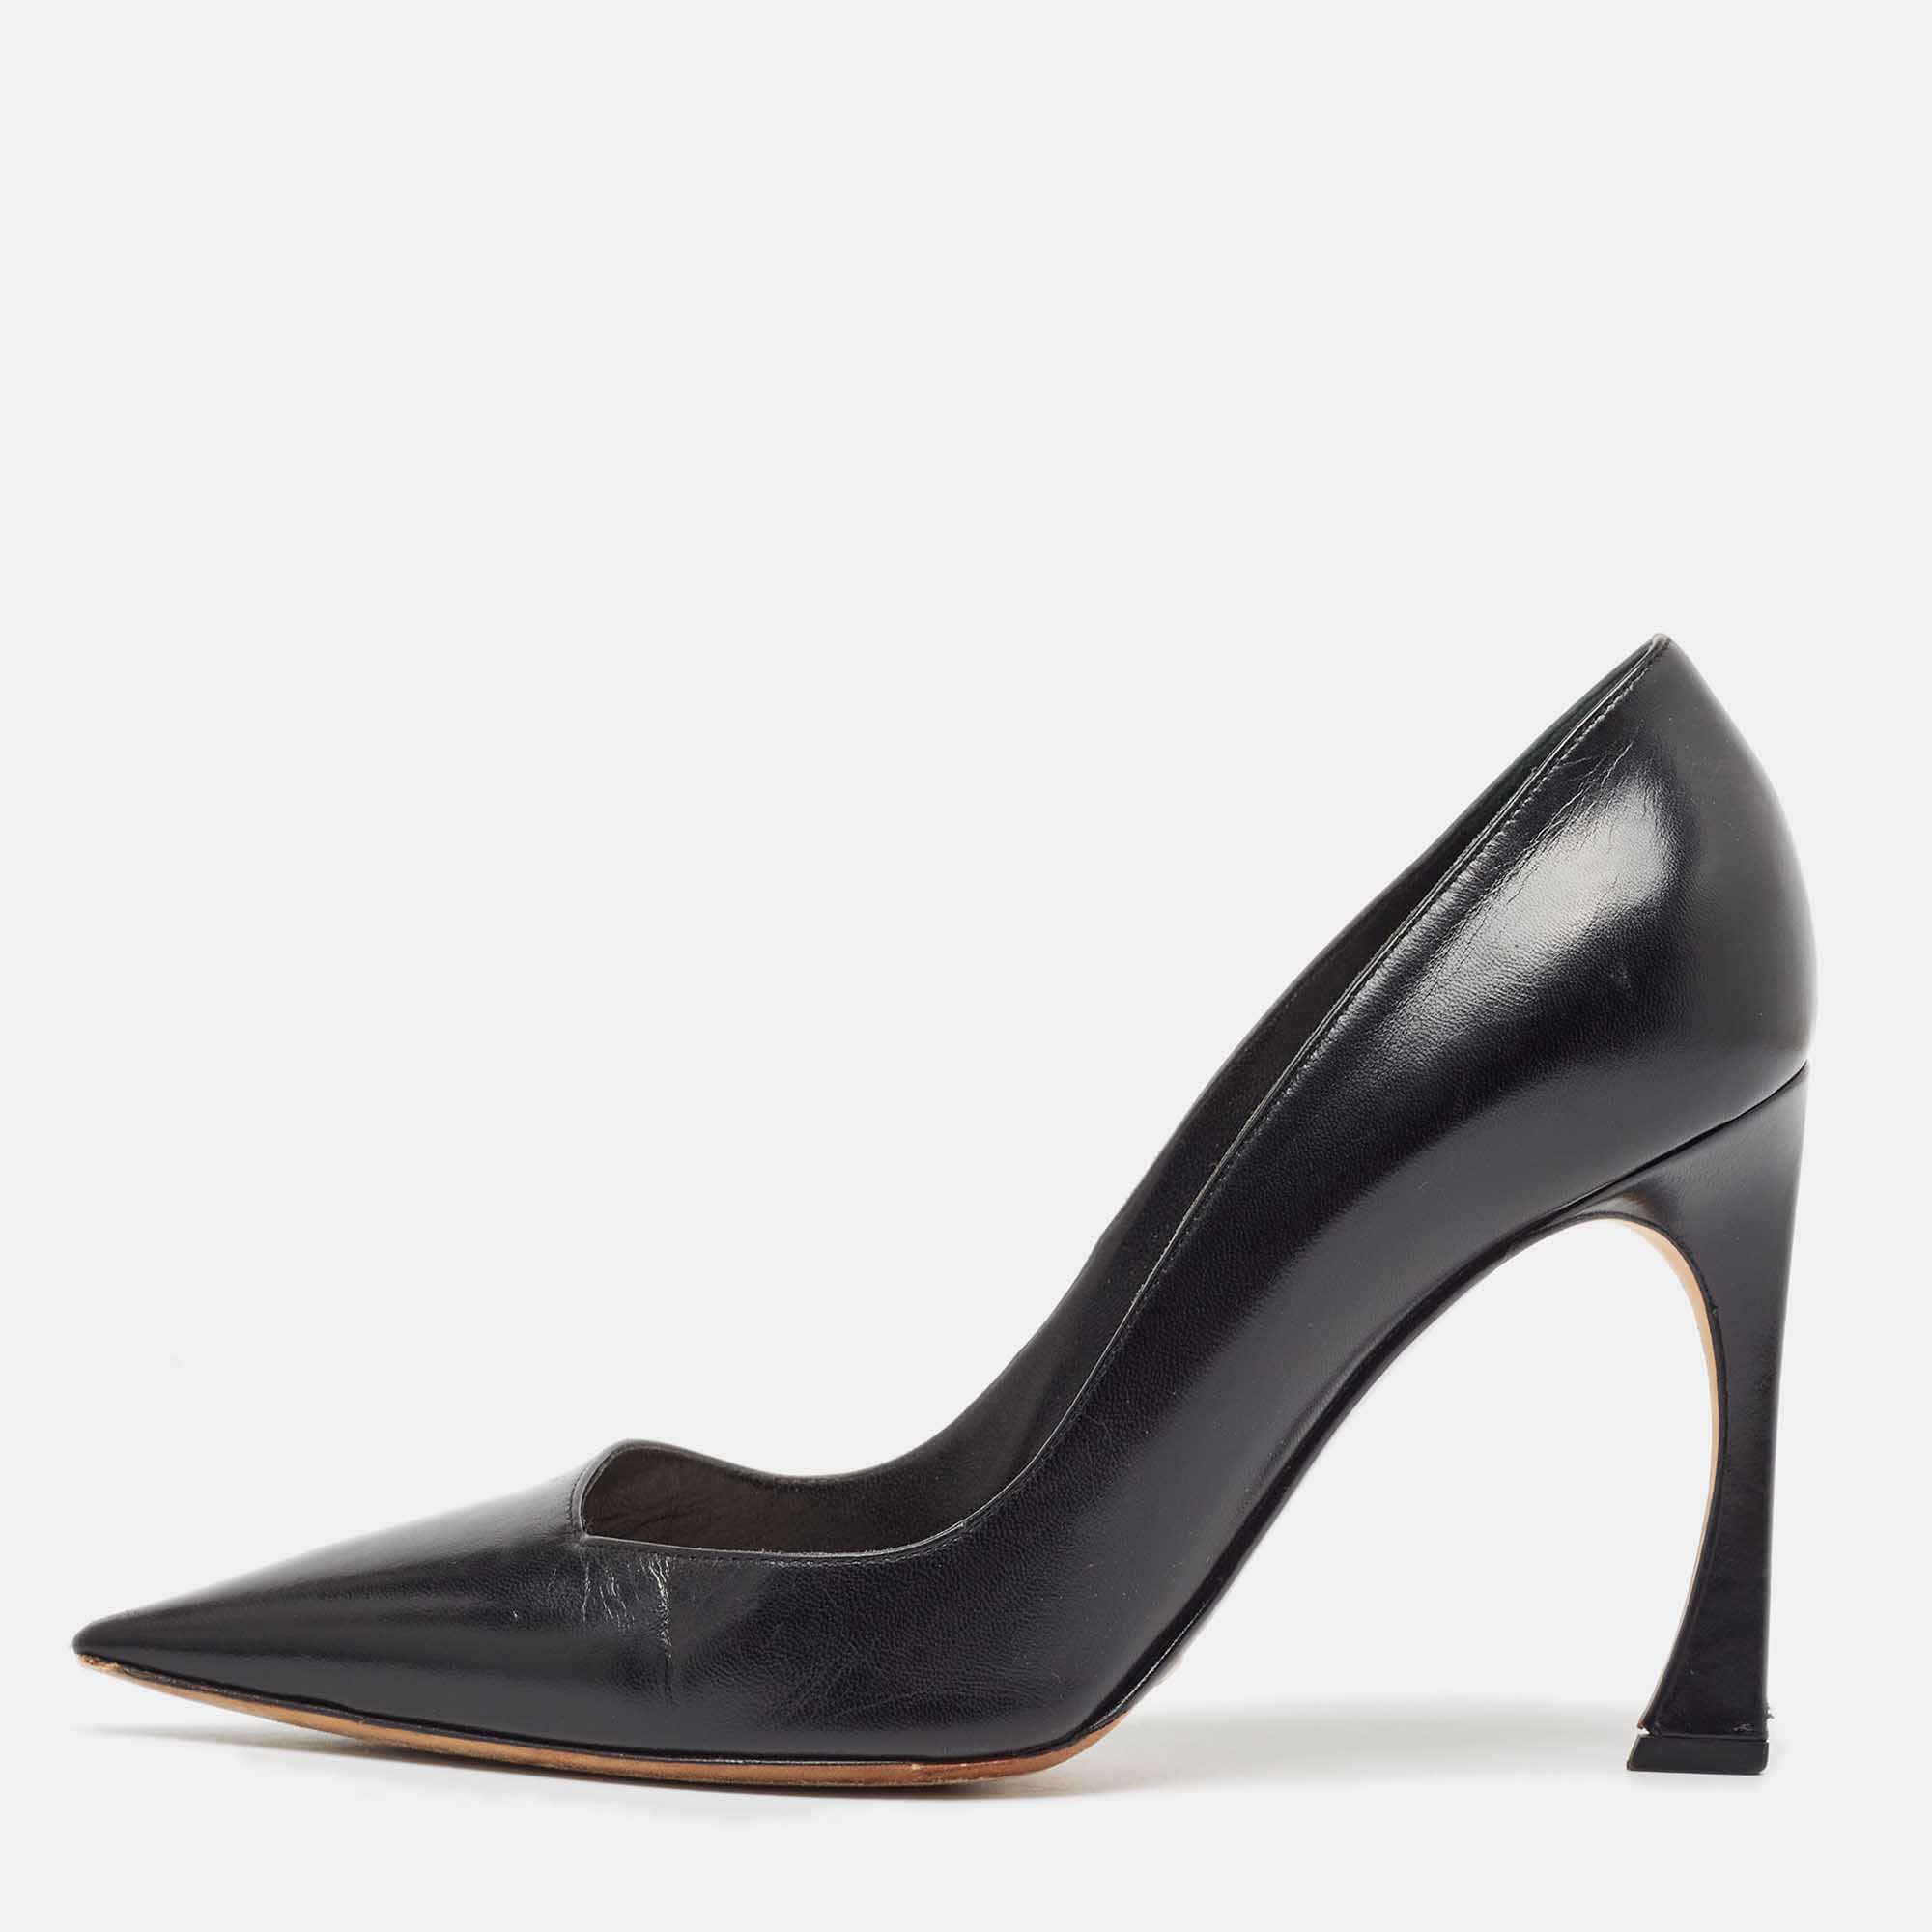 Dior black leather pointed toe pumps size 37.5